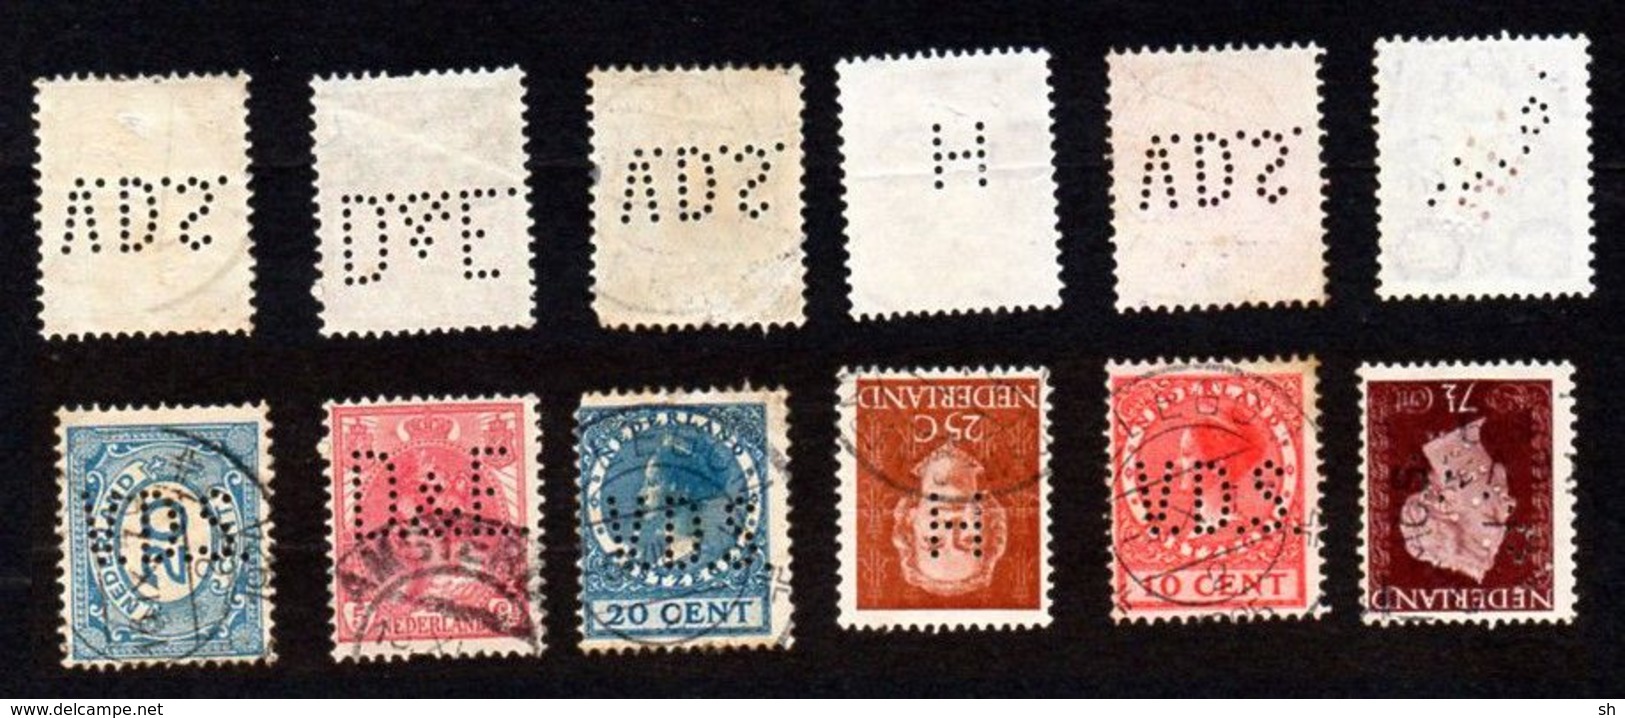 Perfins - Perforé - Lochung - 6 Timbres - Pays-Bas  - Nederland - Netherland - Perfin